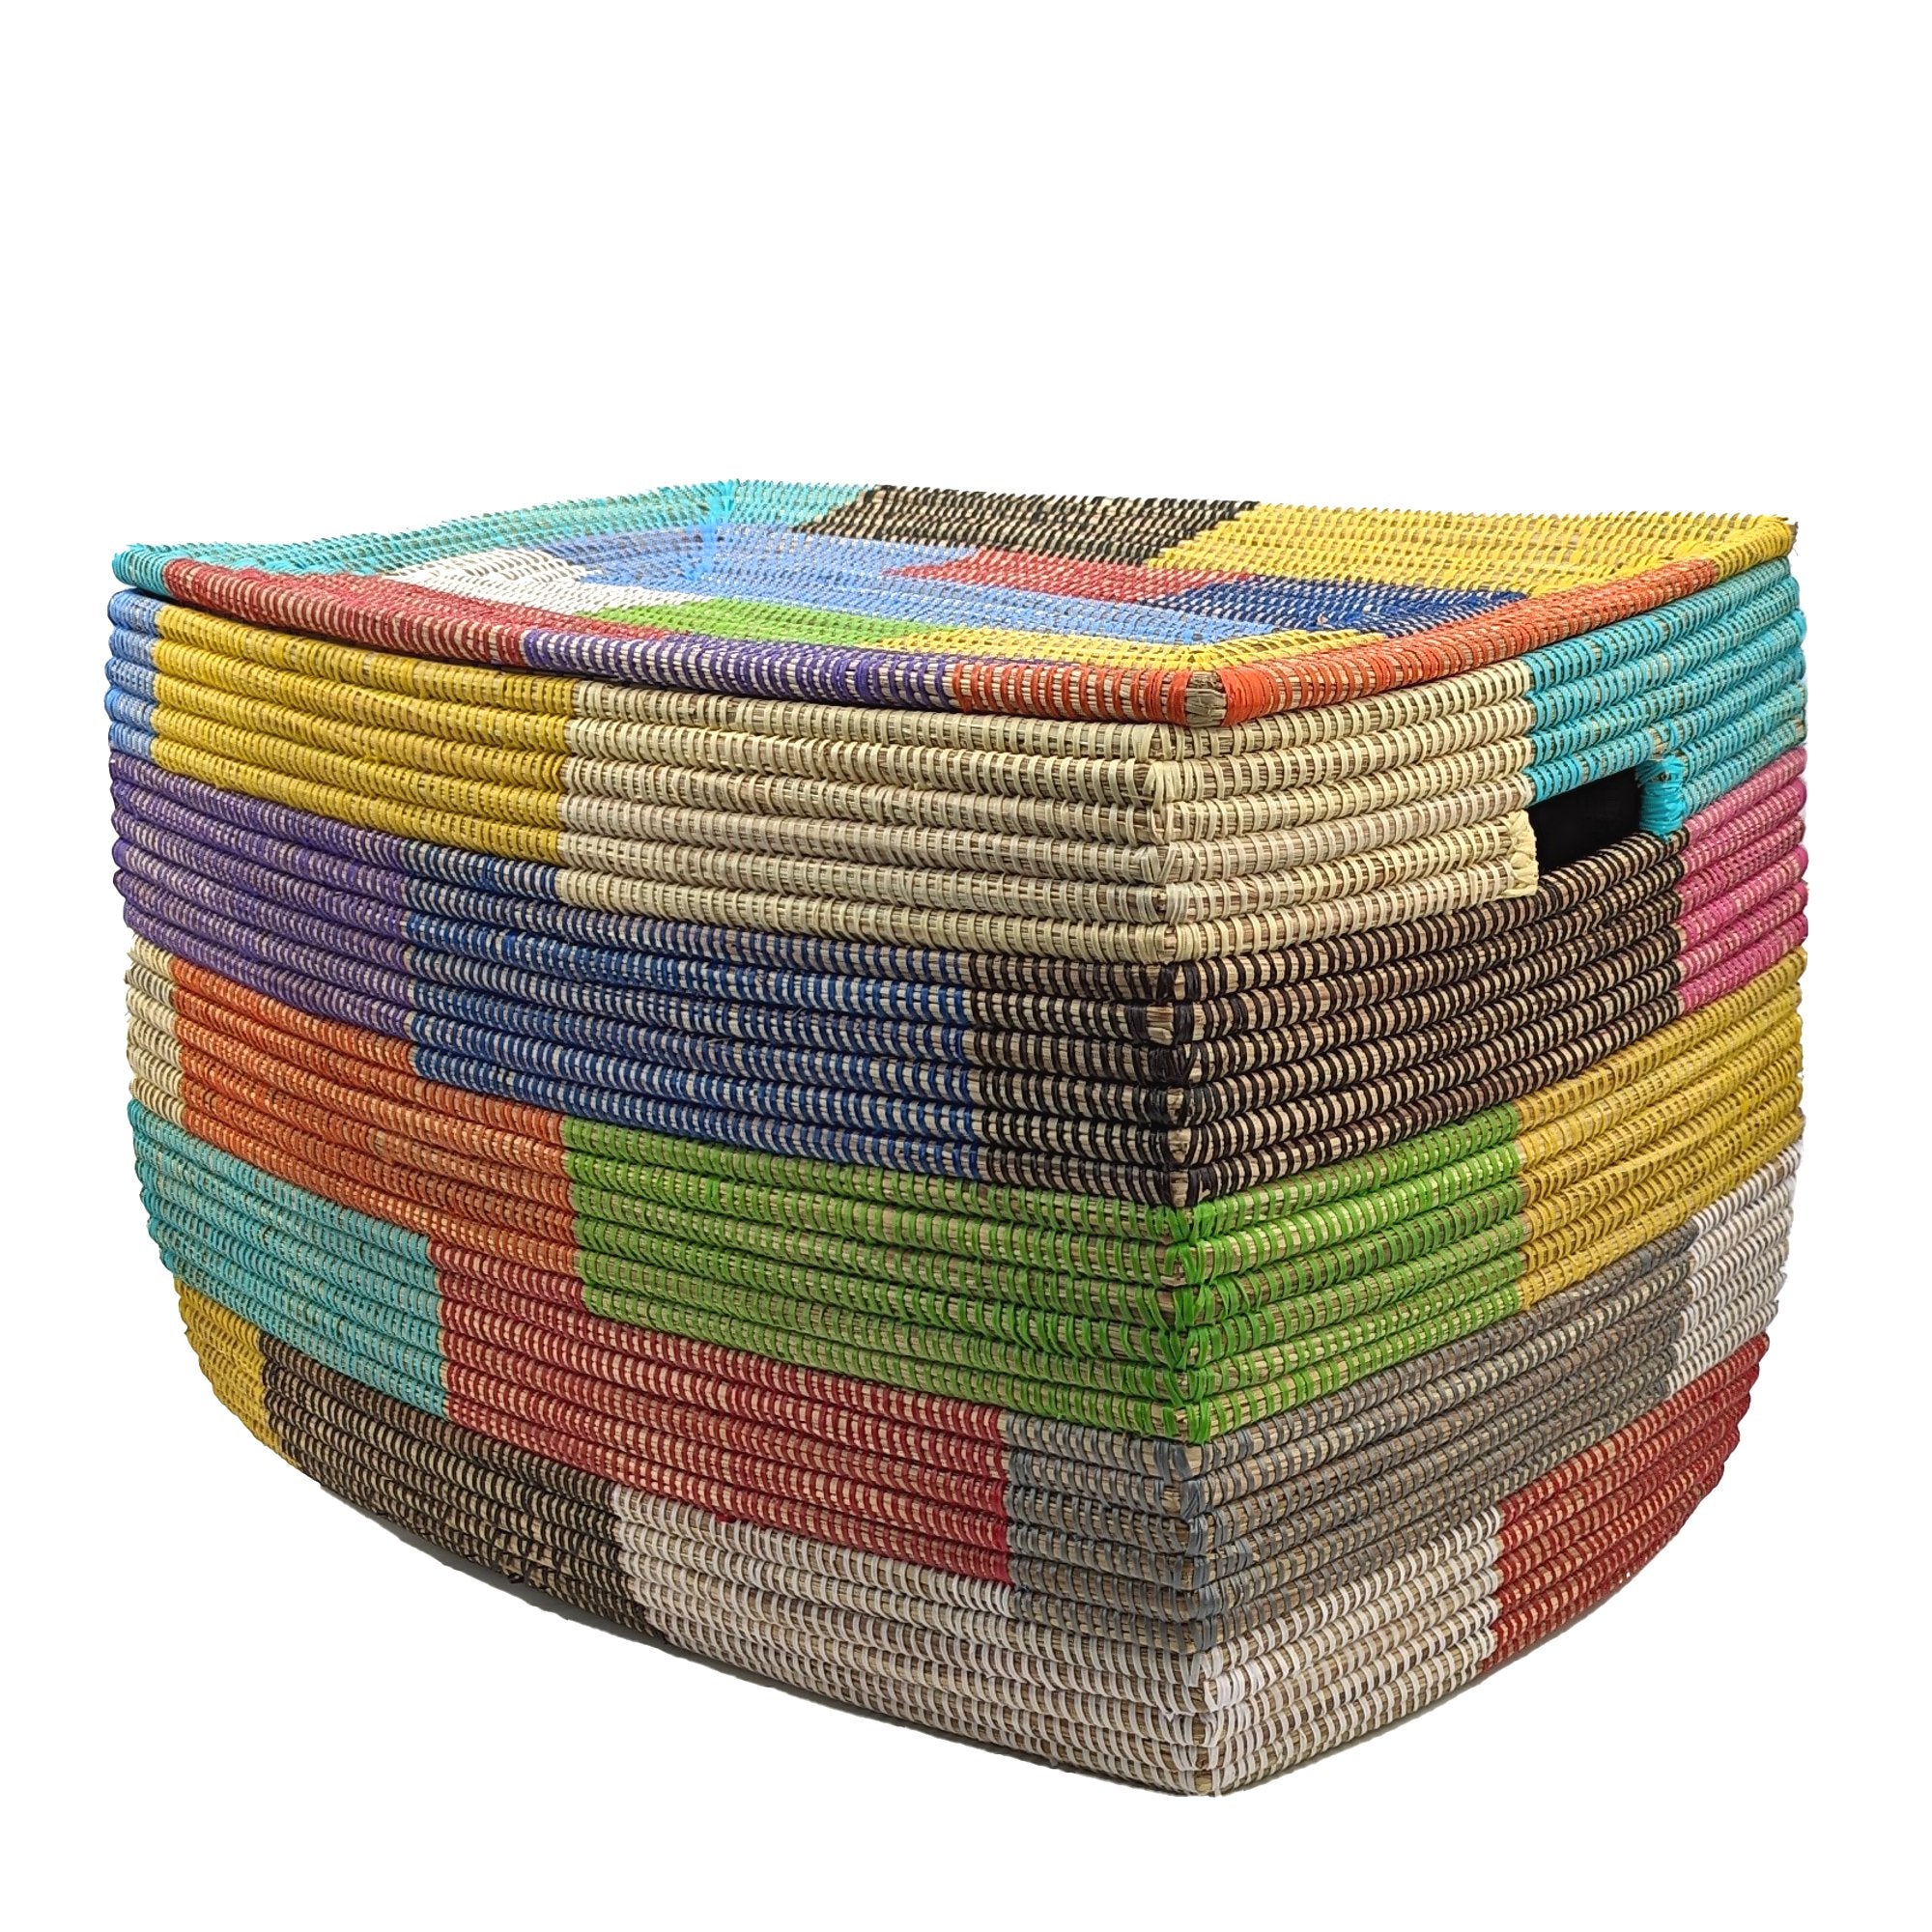 XXL wicker chest with lid – woven basket